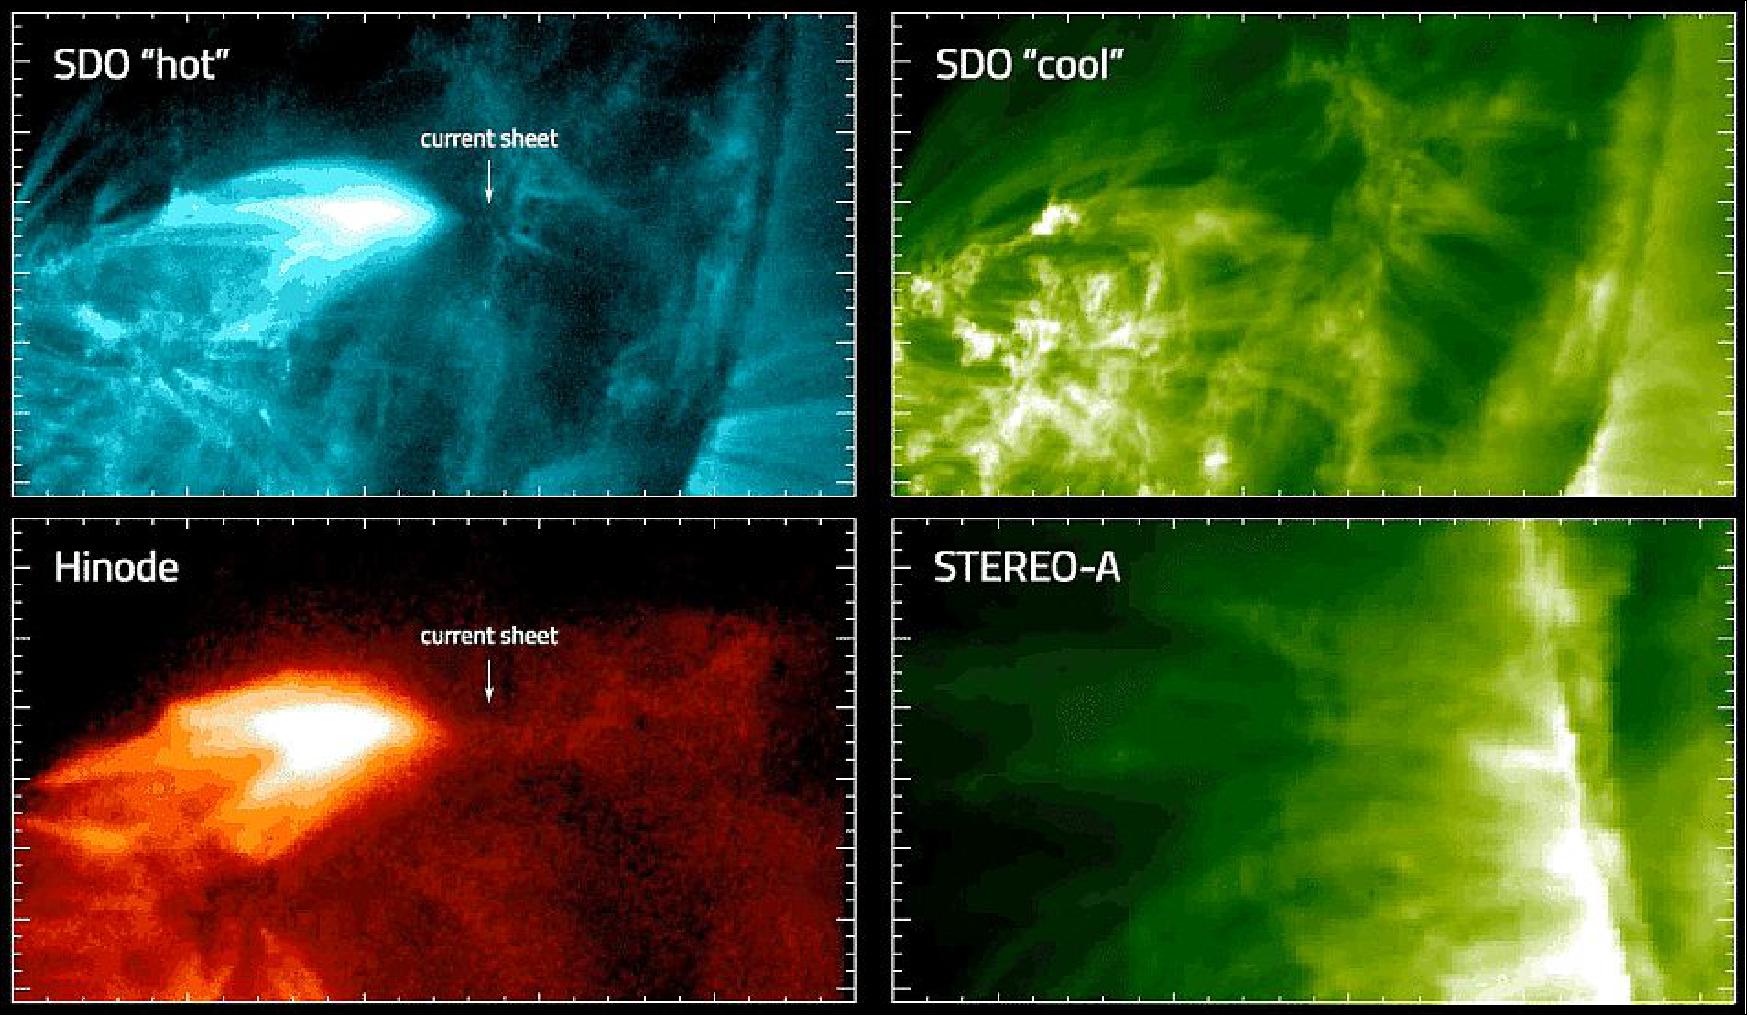 Figure 16: During a December 2013 solar flare, three NASA missions observed a current sheet form – a strong clue for explaining what initiates the flares. This animation shows four views of the flare from NASA’s Solar Dynamics Observatory, NASA’s Solar and Terrestrial Relations Observatory, and JAXA/NASA’s Hinode, allowing scientists to make unprecedented measurements of its characteristics. The current sheet is a long, thin structure, especially visible in the views on the left. Those two animations depict light emitted by material with higher temperatures, so they better show the extremely hot current sheet (image credit: NASA/JAXA/SDO/STEREO/Hinode, courtesy Zhu, et al.)